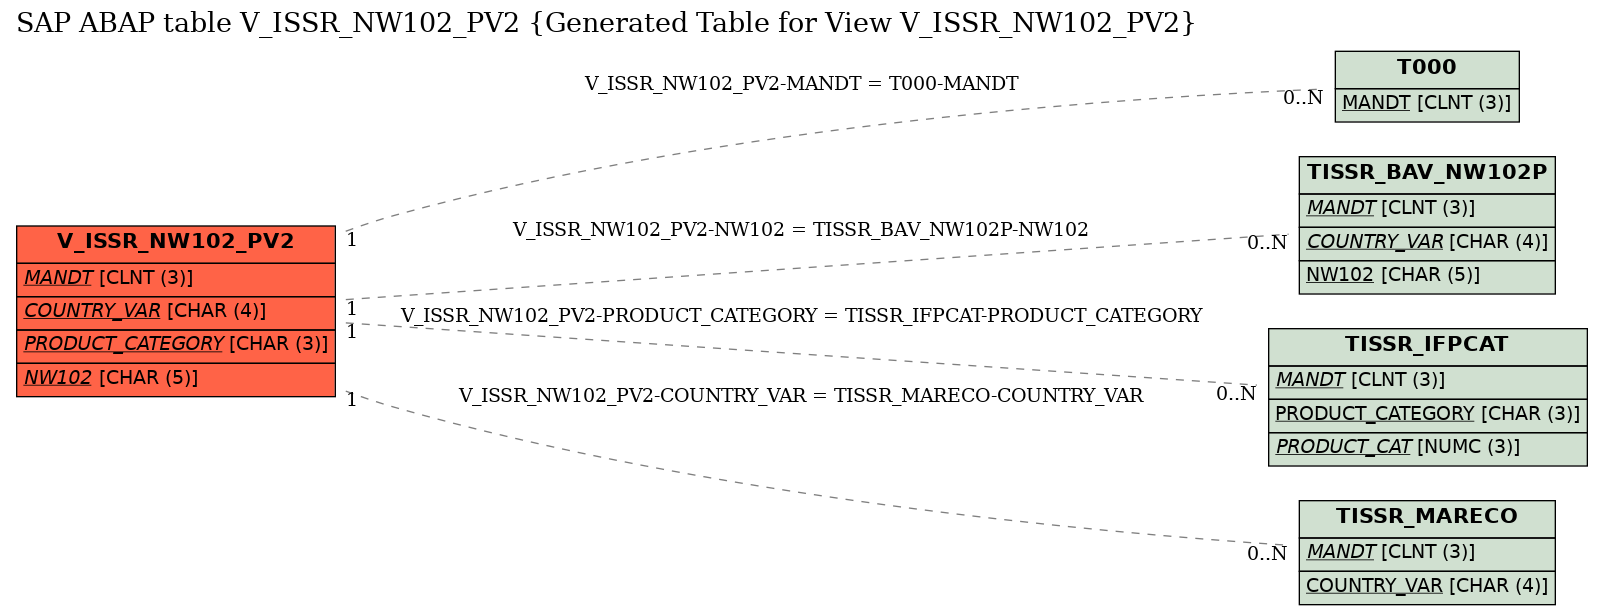 E-R Diagram for table V_ISSR_NW102_PV2 (Generated Table for View V_ISSR_NW102_PV2)